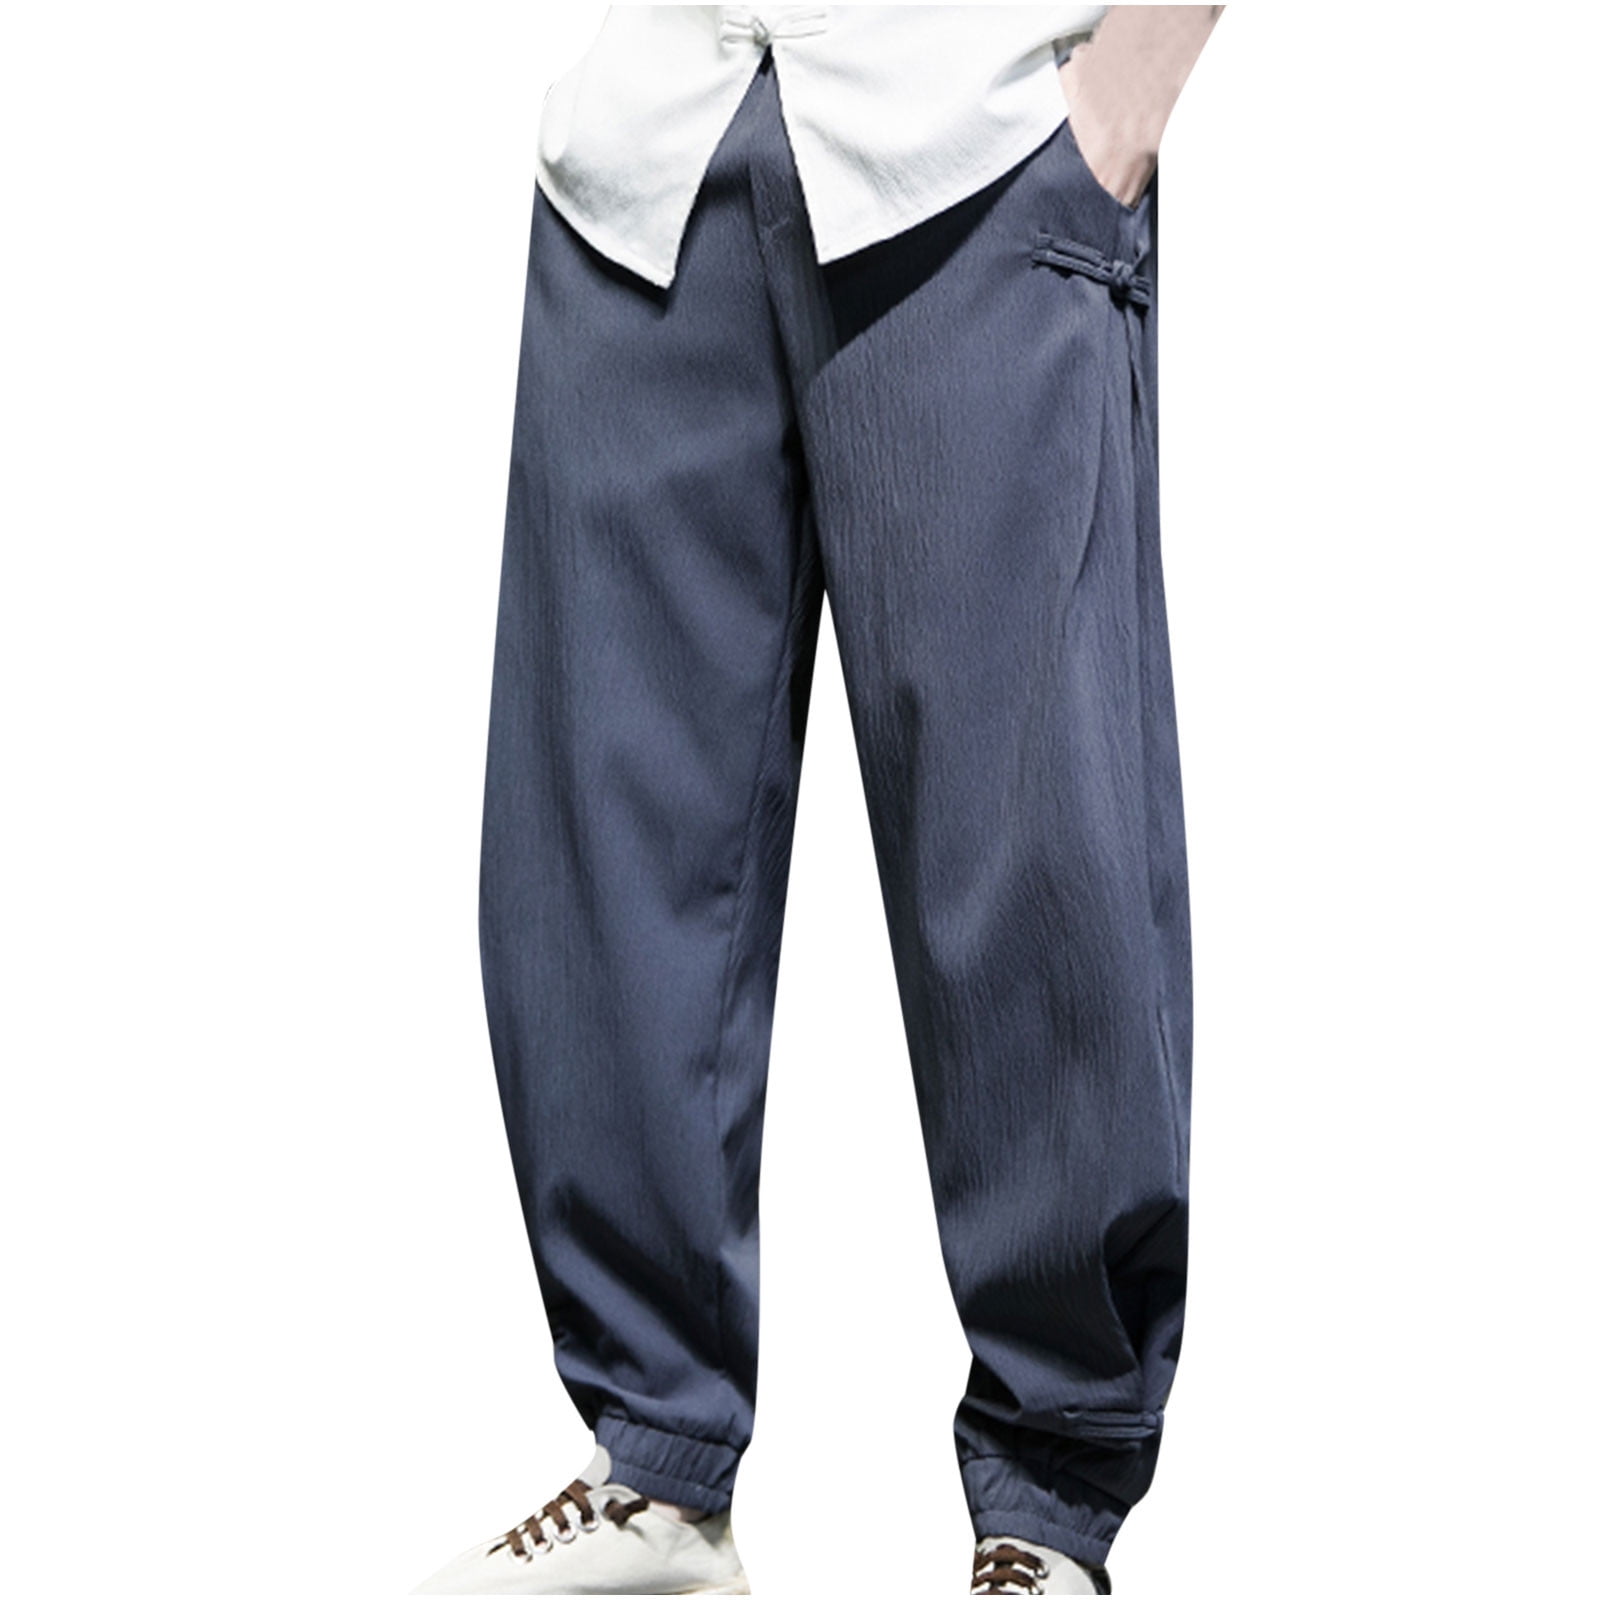 Top more than 161 baggy cotton trousers best